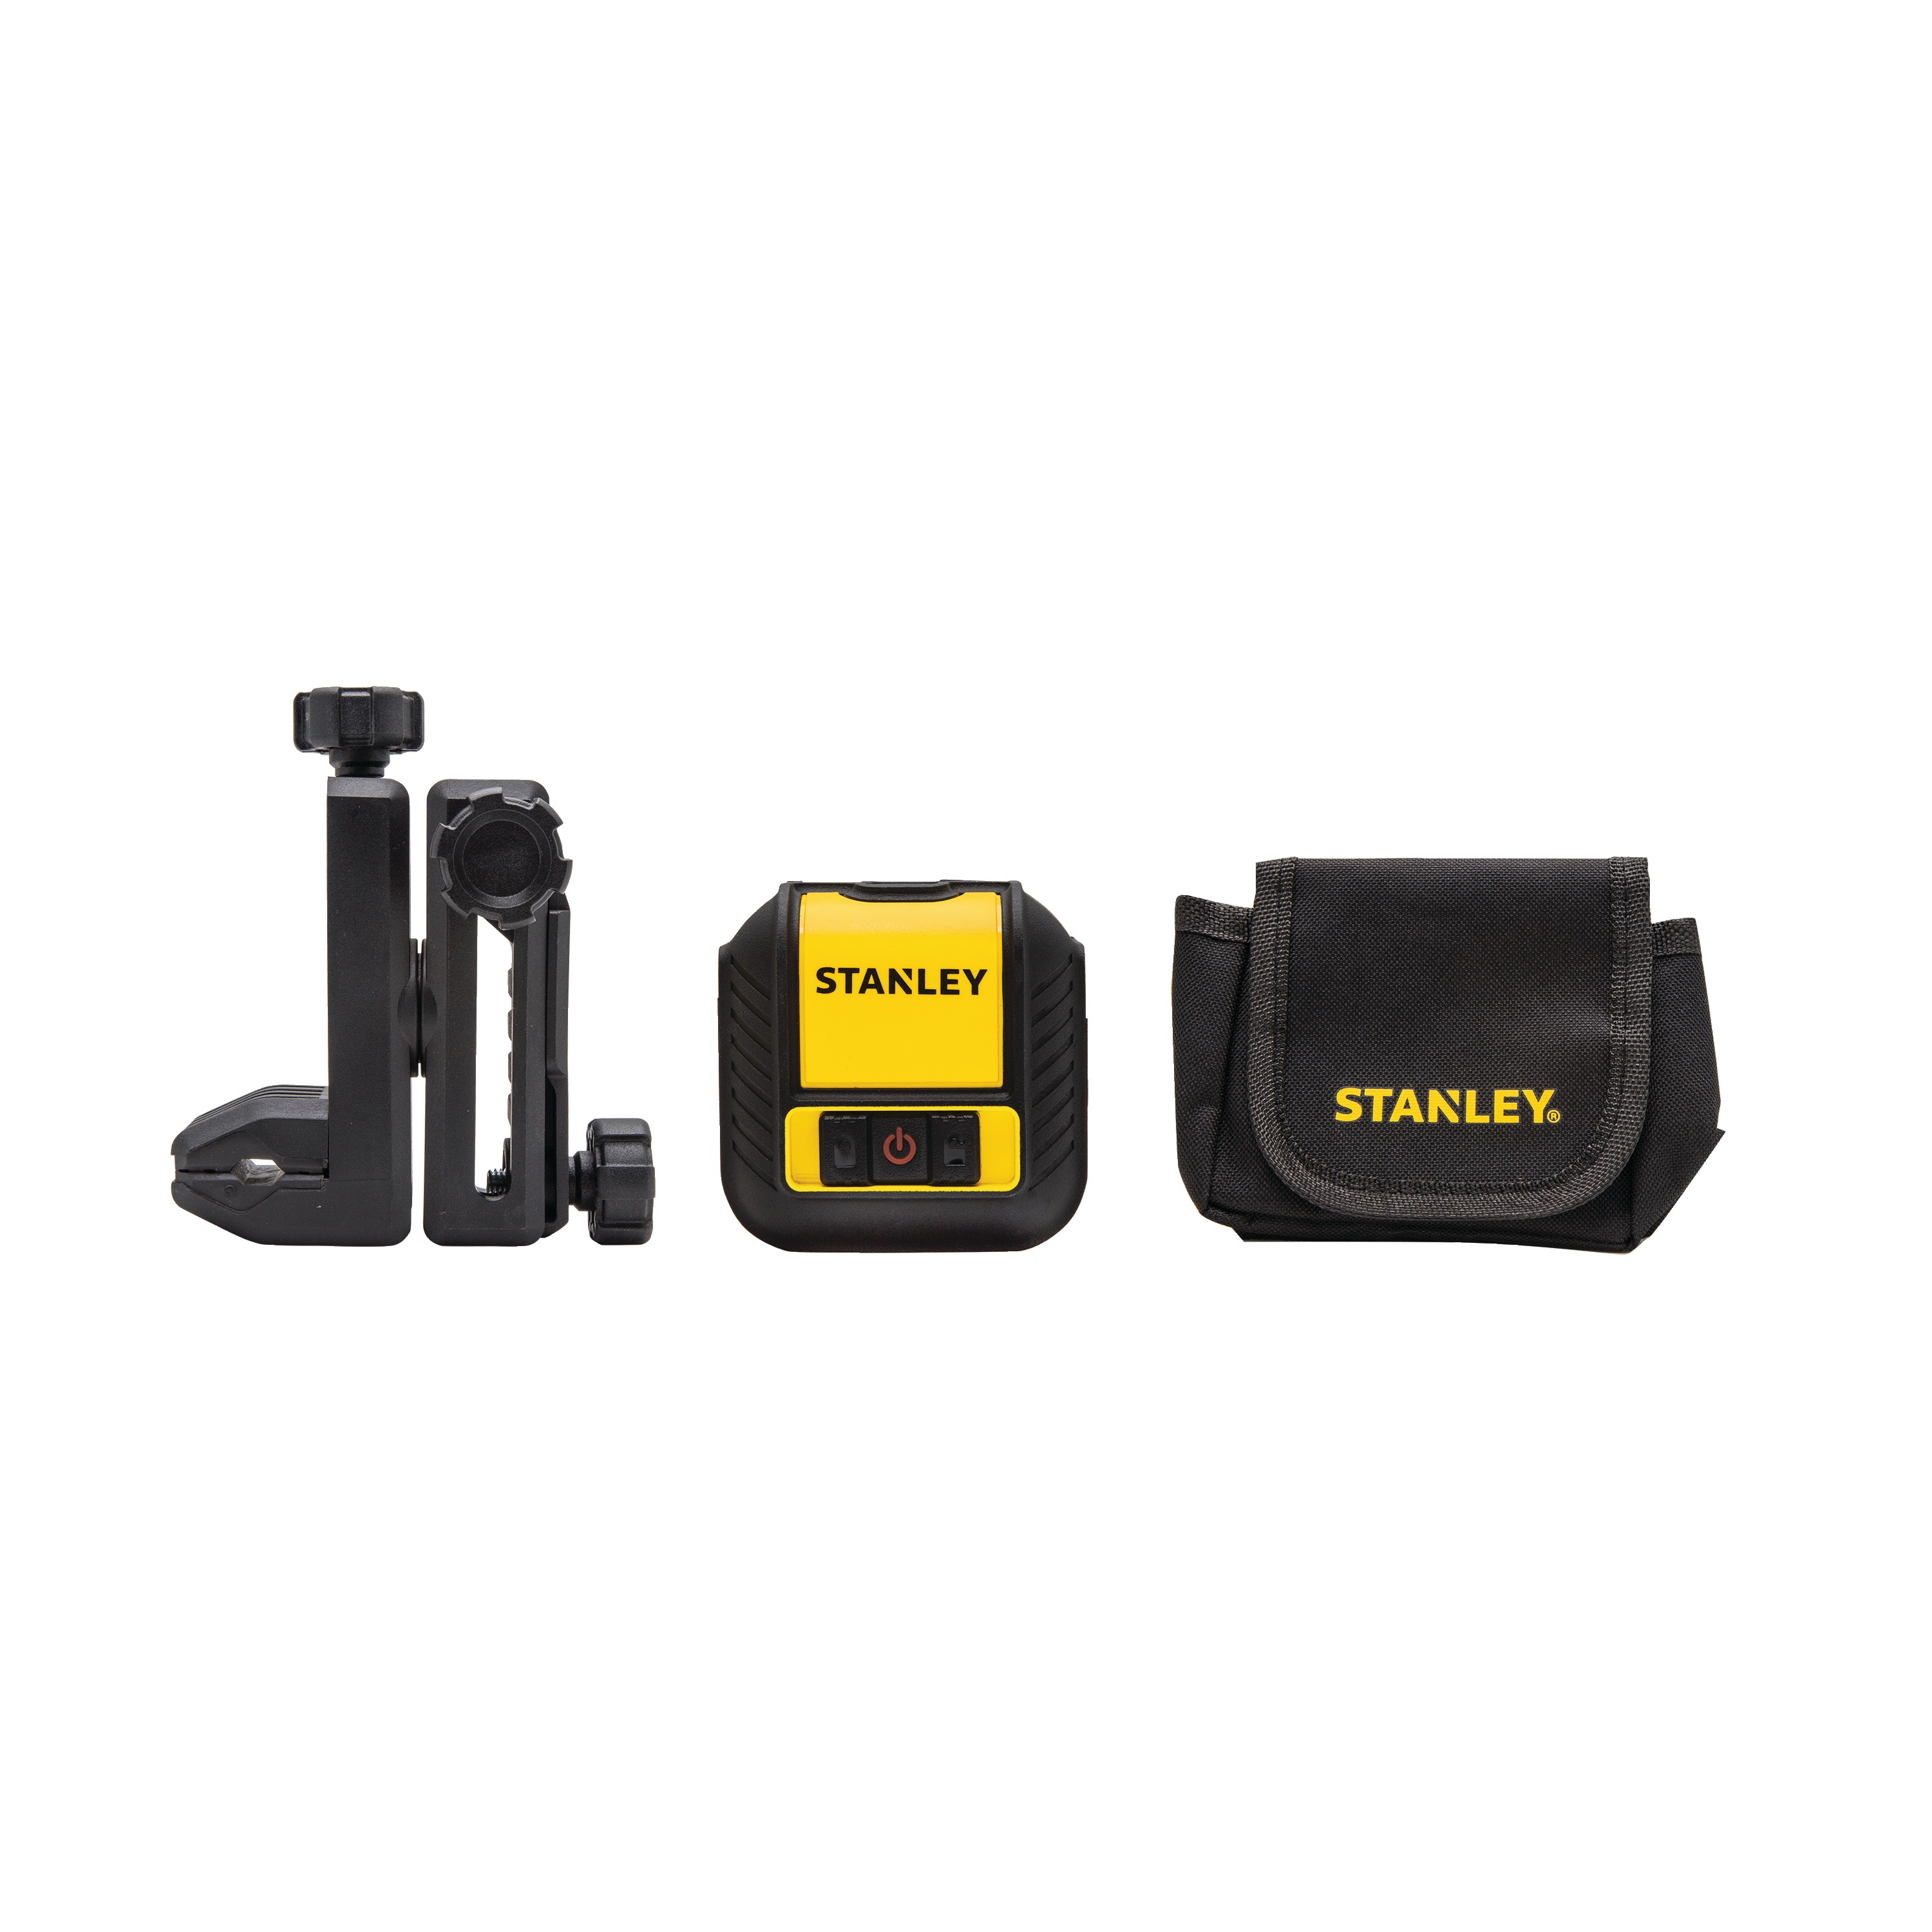 Stanley Tools - CUBIX Red Beam Cross Line Laser Level - STHT77498